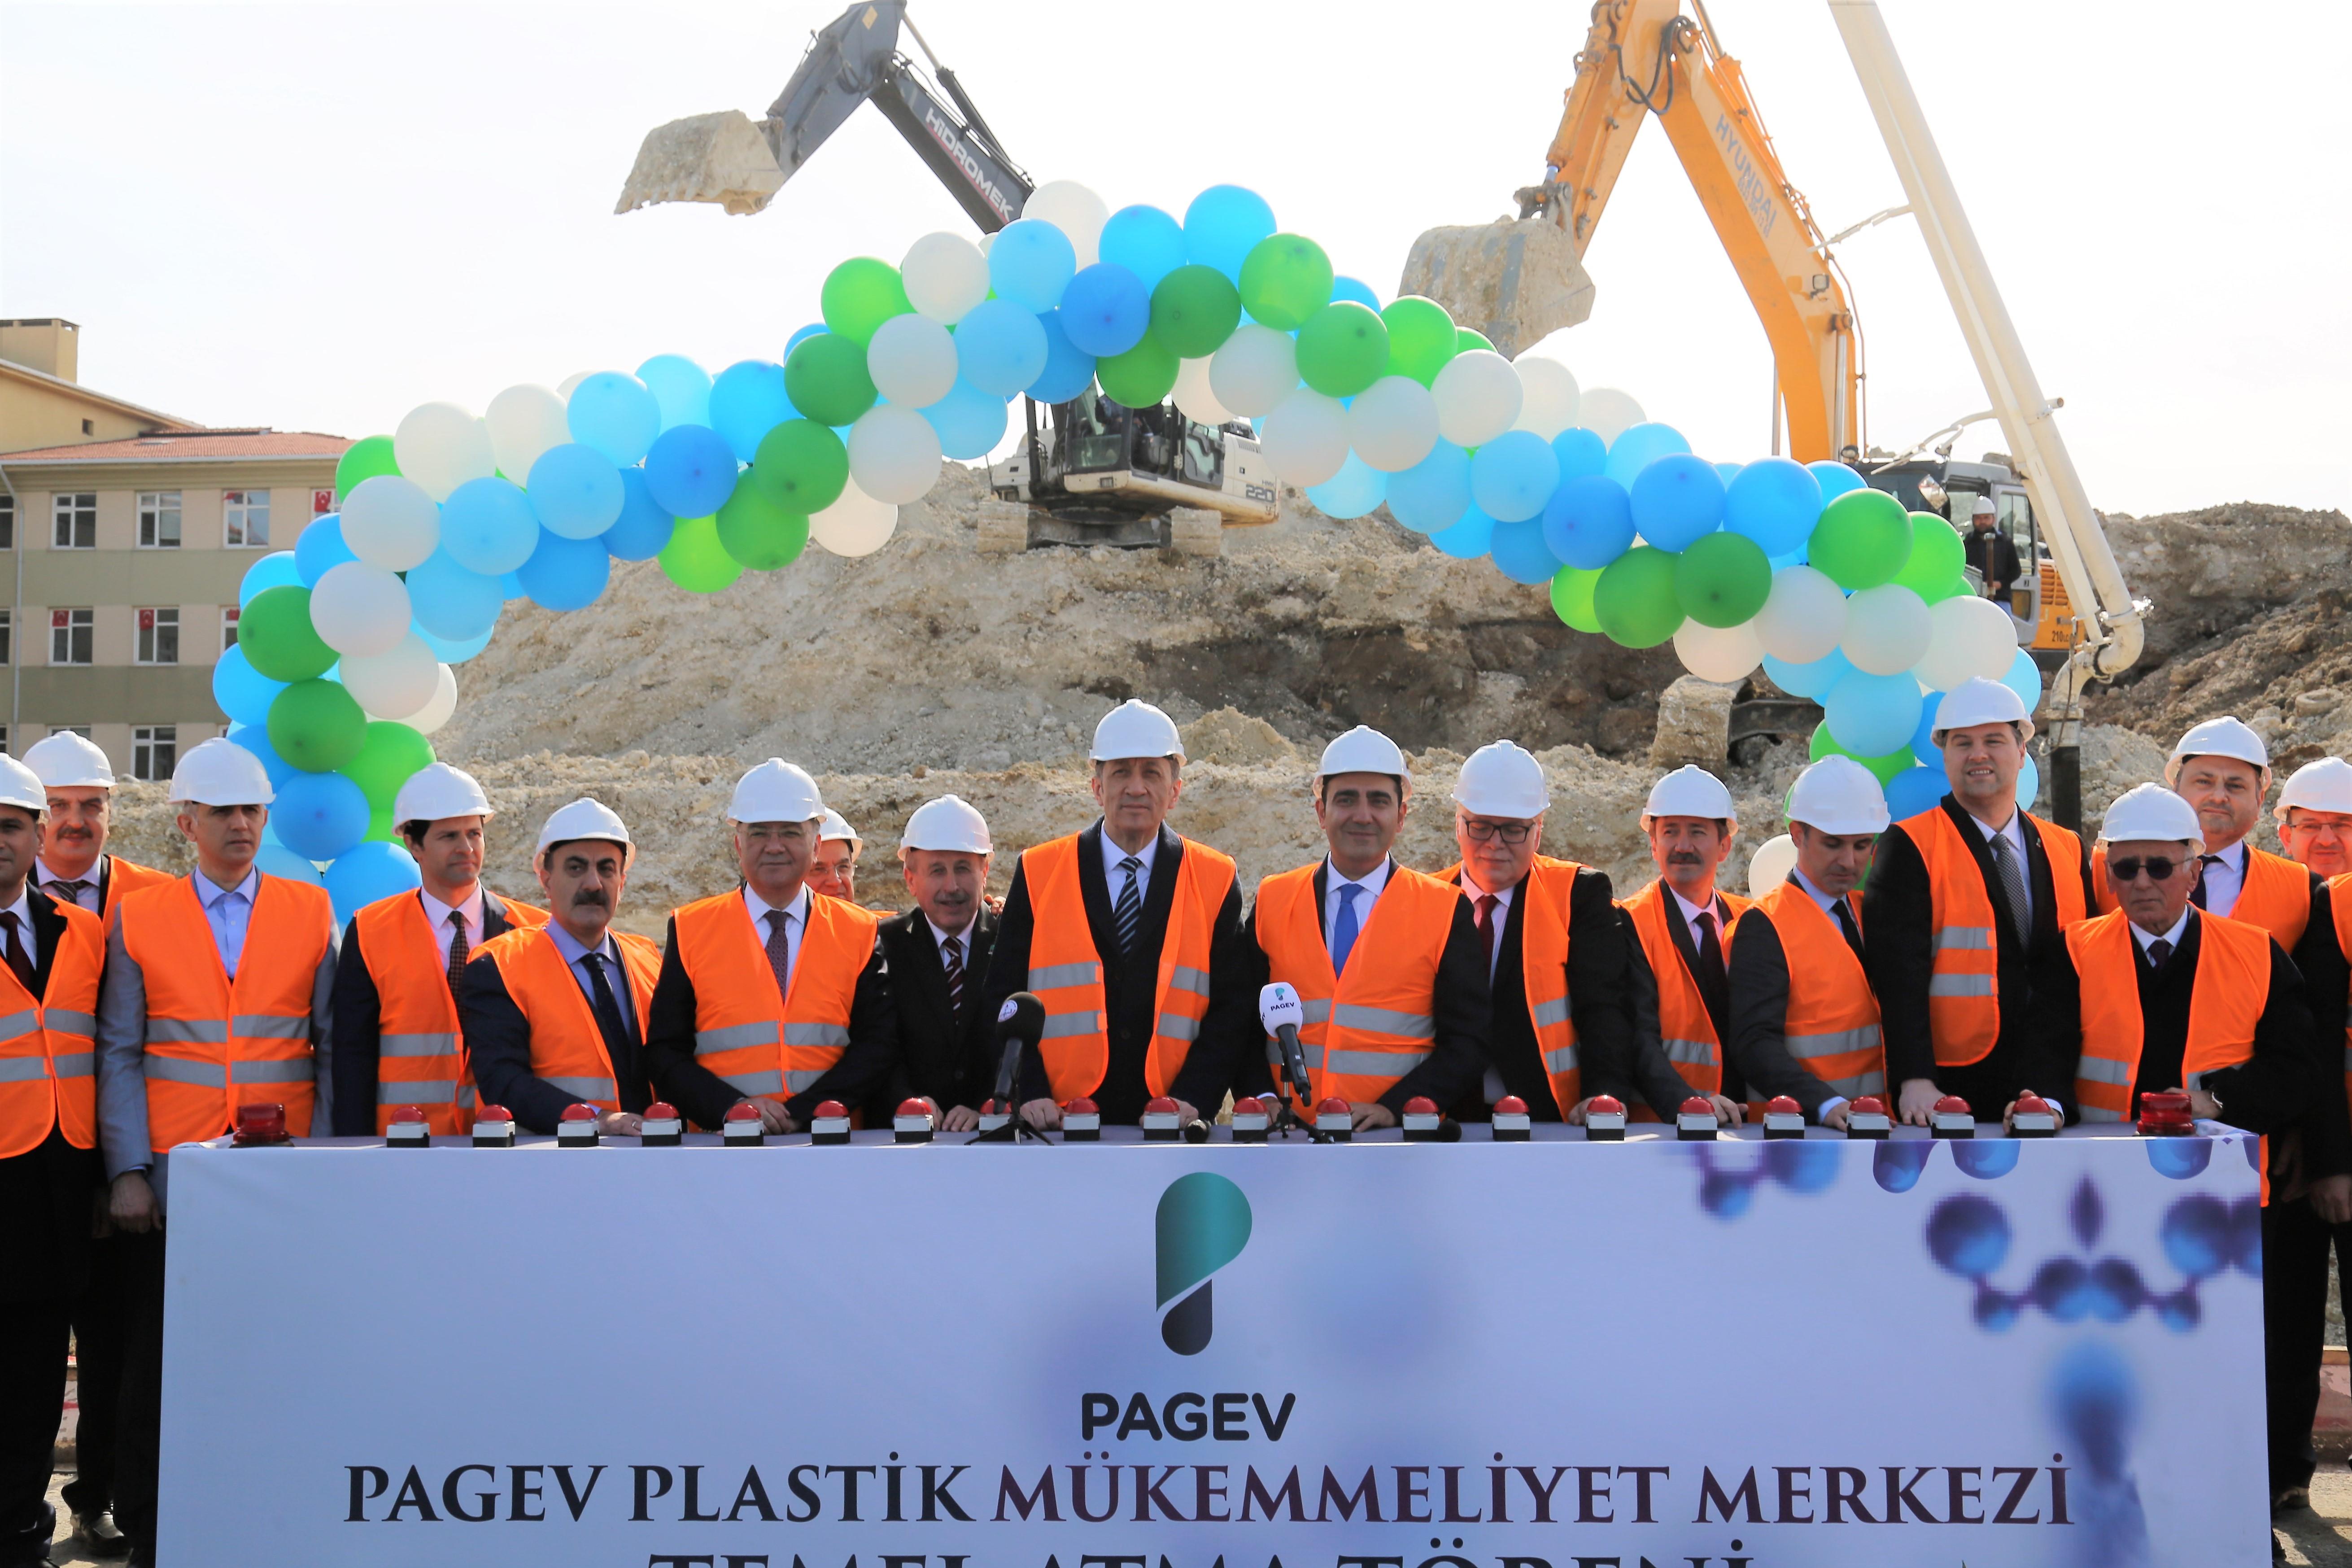 THE GROUNDBREAKING CEROMANY OF TURKEY'S FIRST EXCELLENCE FOUNDATION CENTER WAS HELD